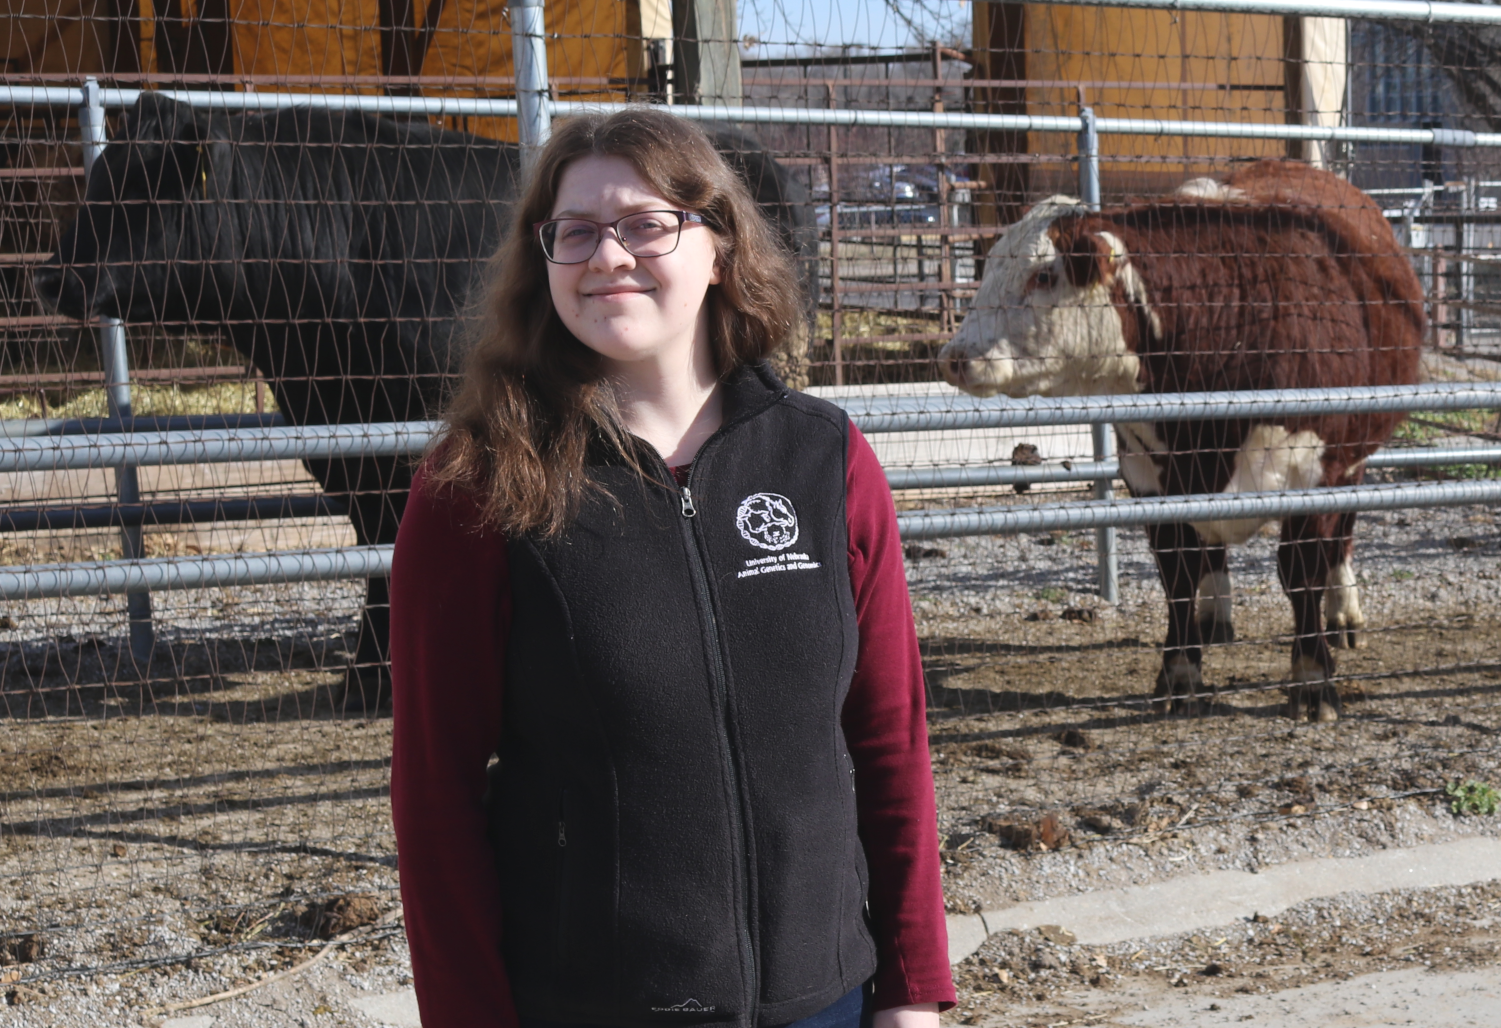 Rachel Reith is a PhD candidate at UNL working on genetic defects in beef cattle.